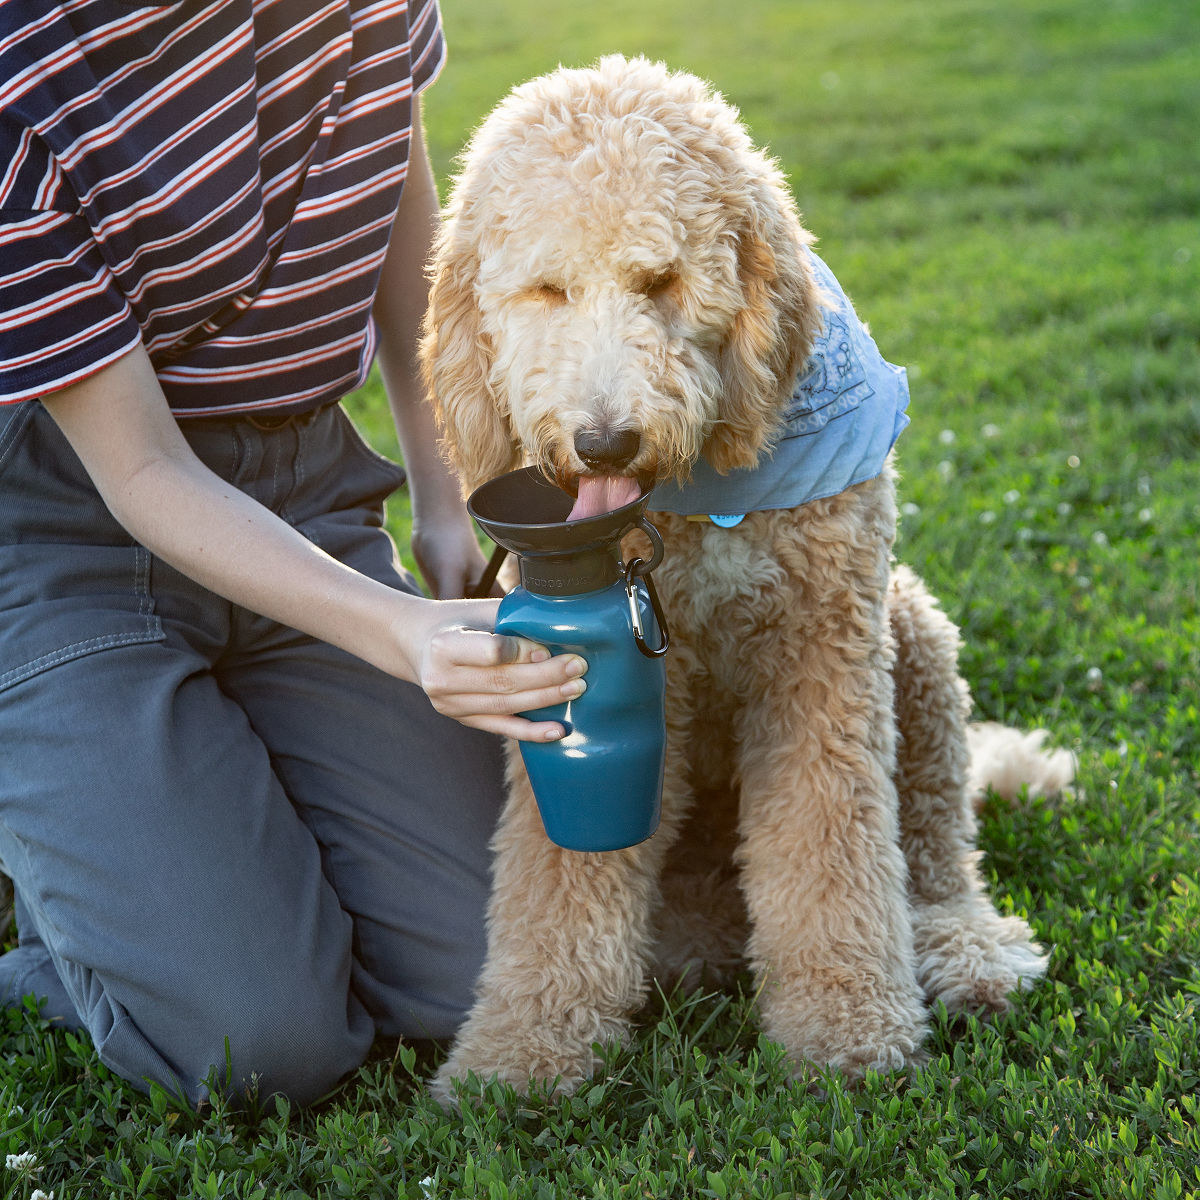 A dog drinking from the bottle, which has a top that makes it easier for dogs to lap up water